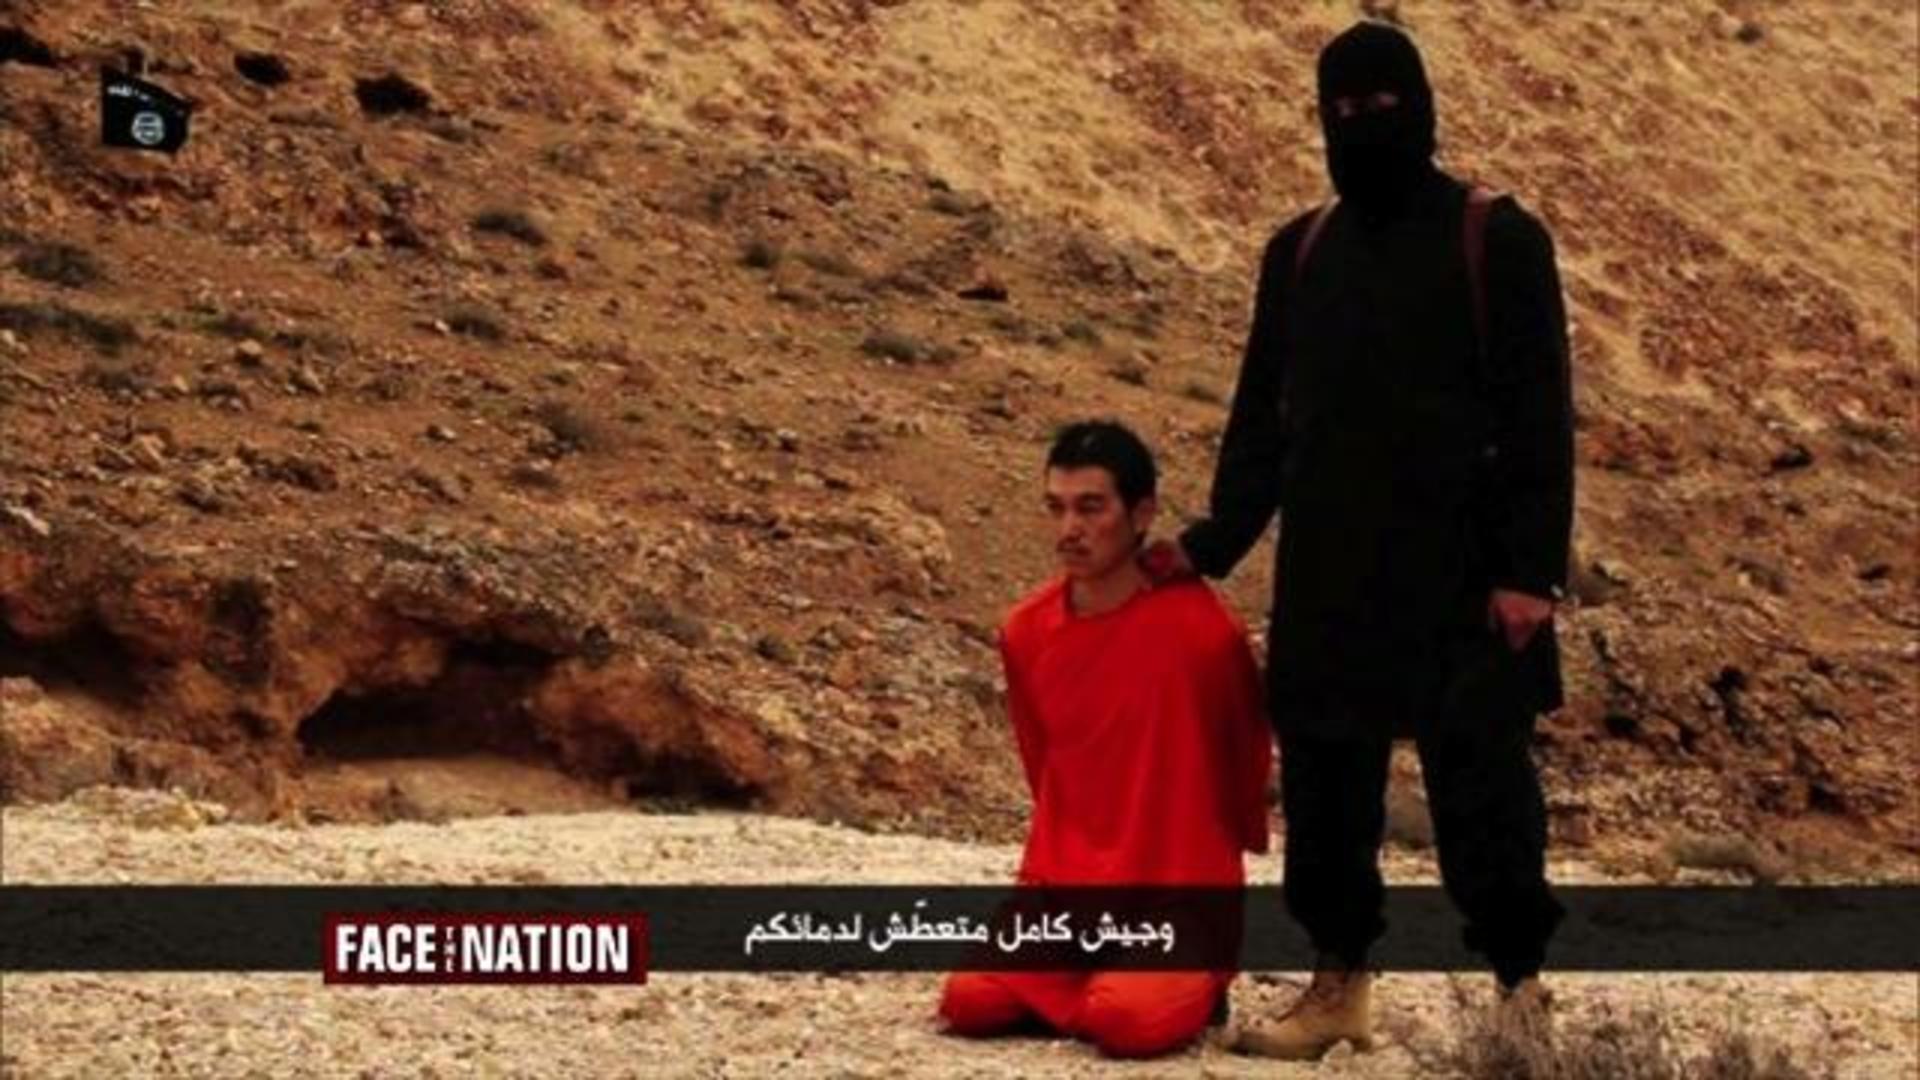 ISIS executes Japanese hostage in new video - CBS News